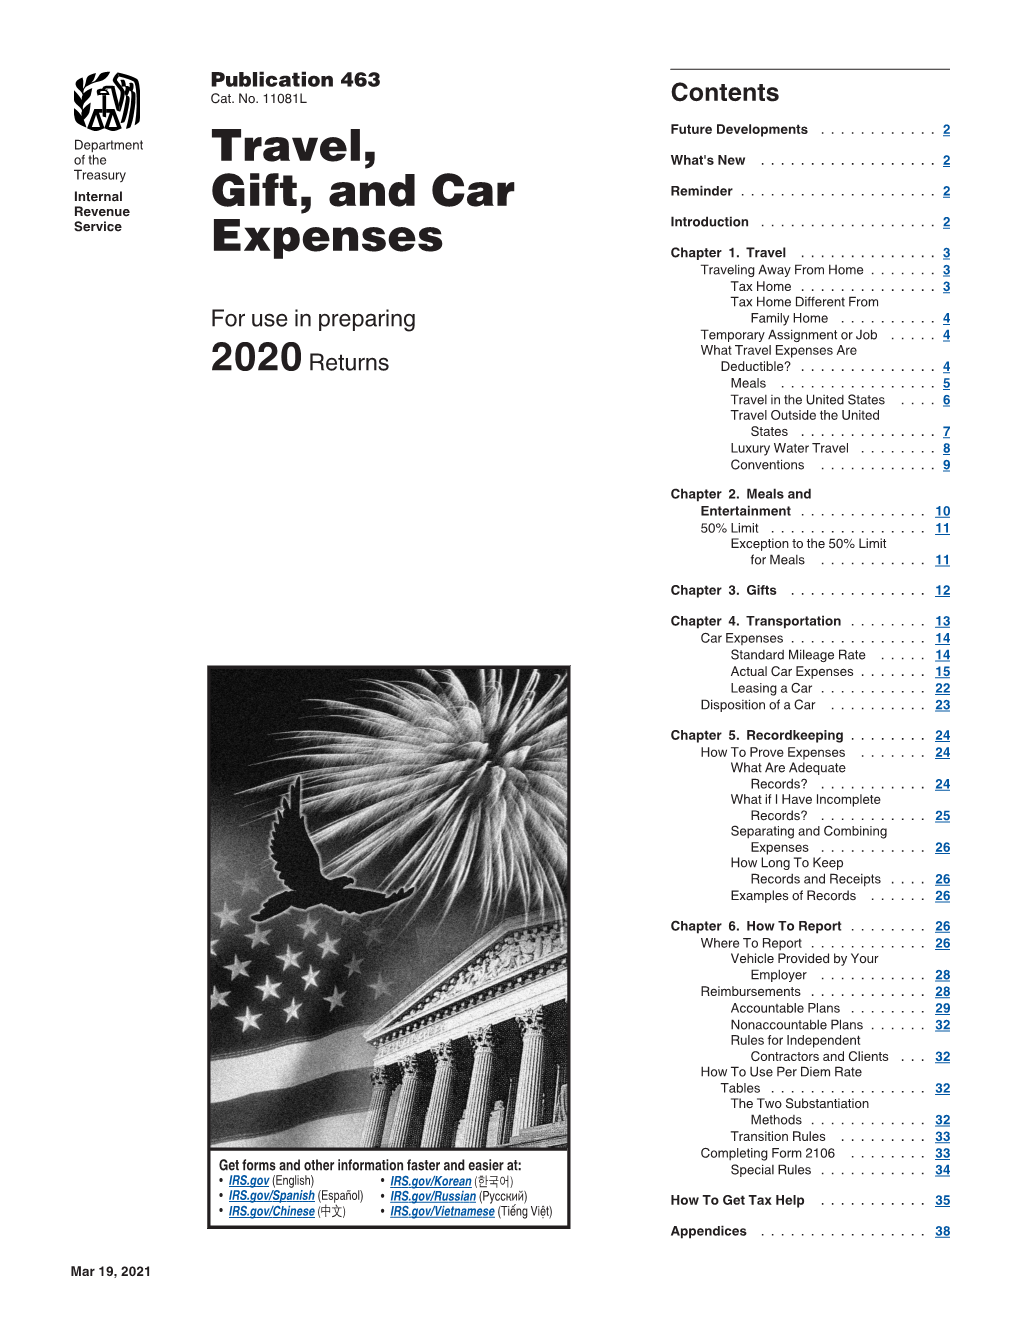 Publication 463, Travel, Entertainment, Gift, and Car Expenses